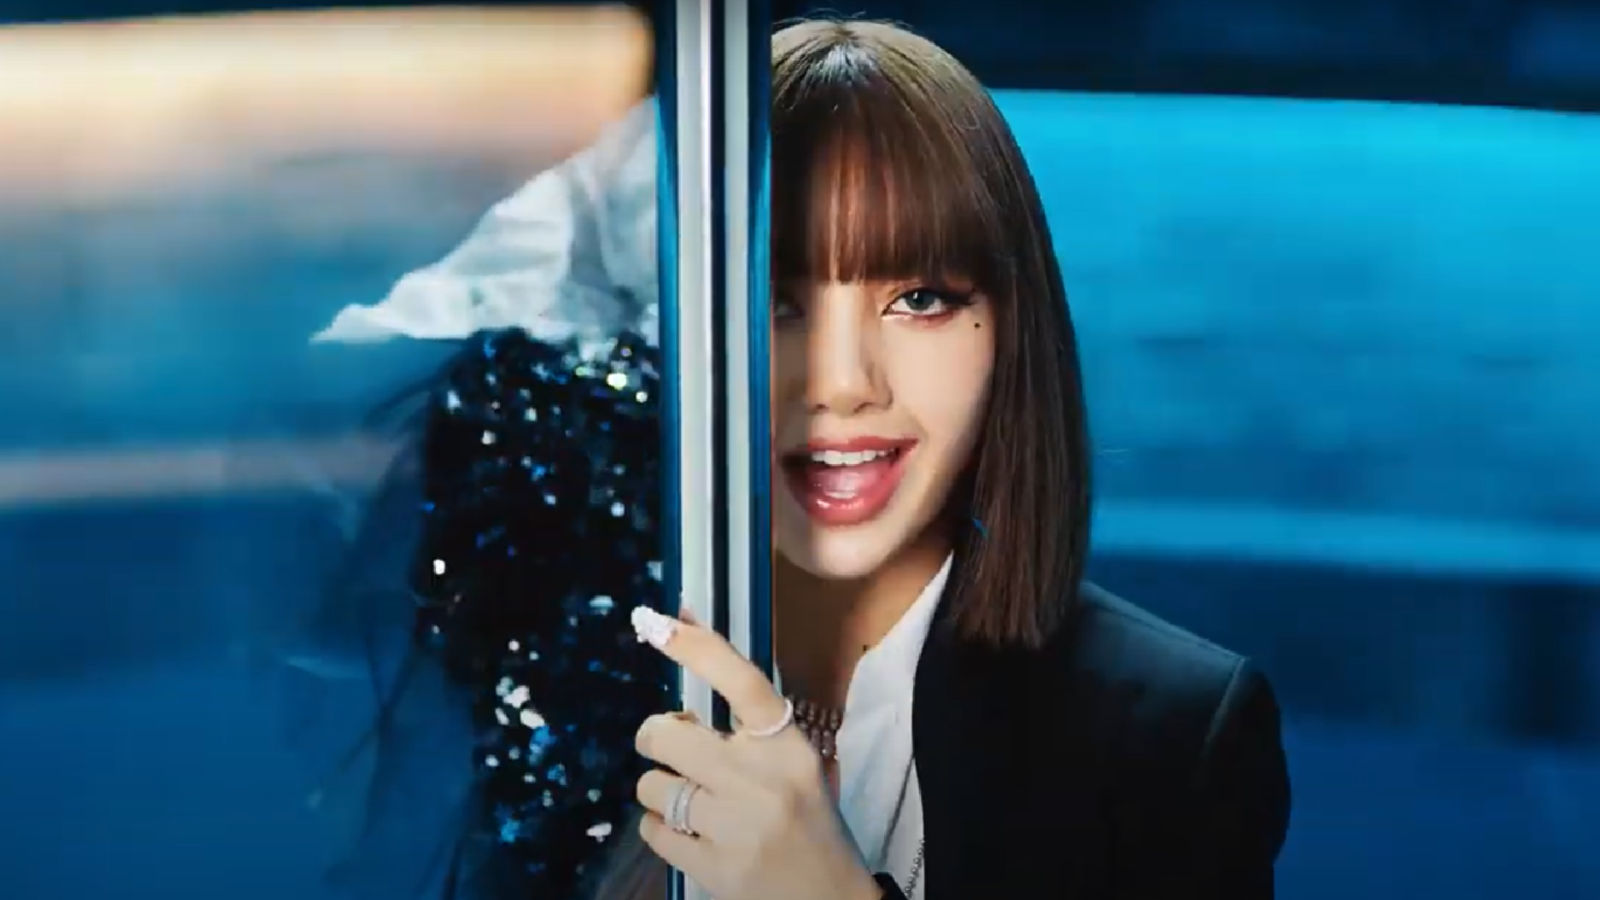 Blackpink's Lisa Is Our March 2023 Cover Star